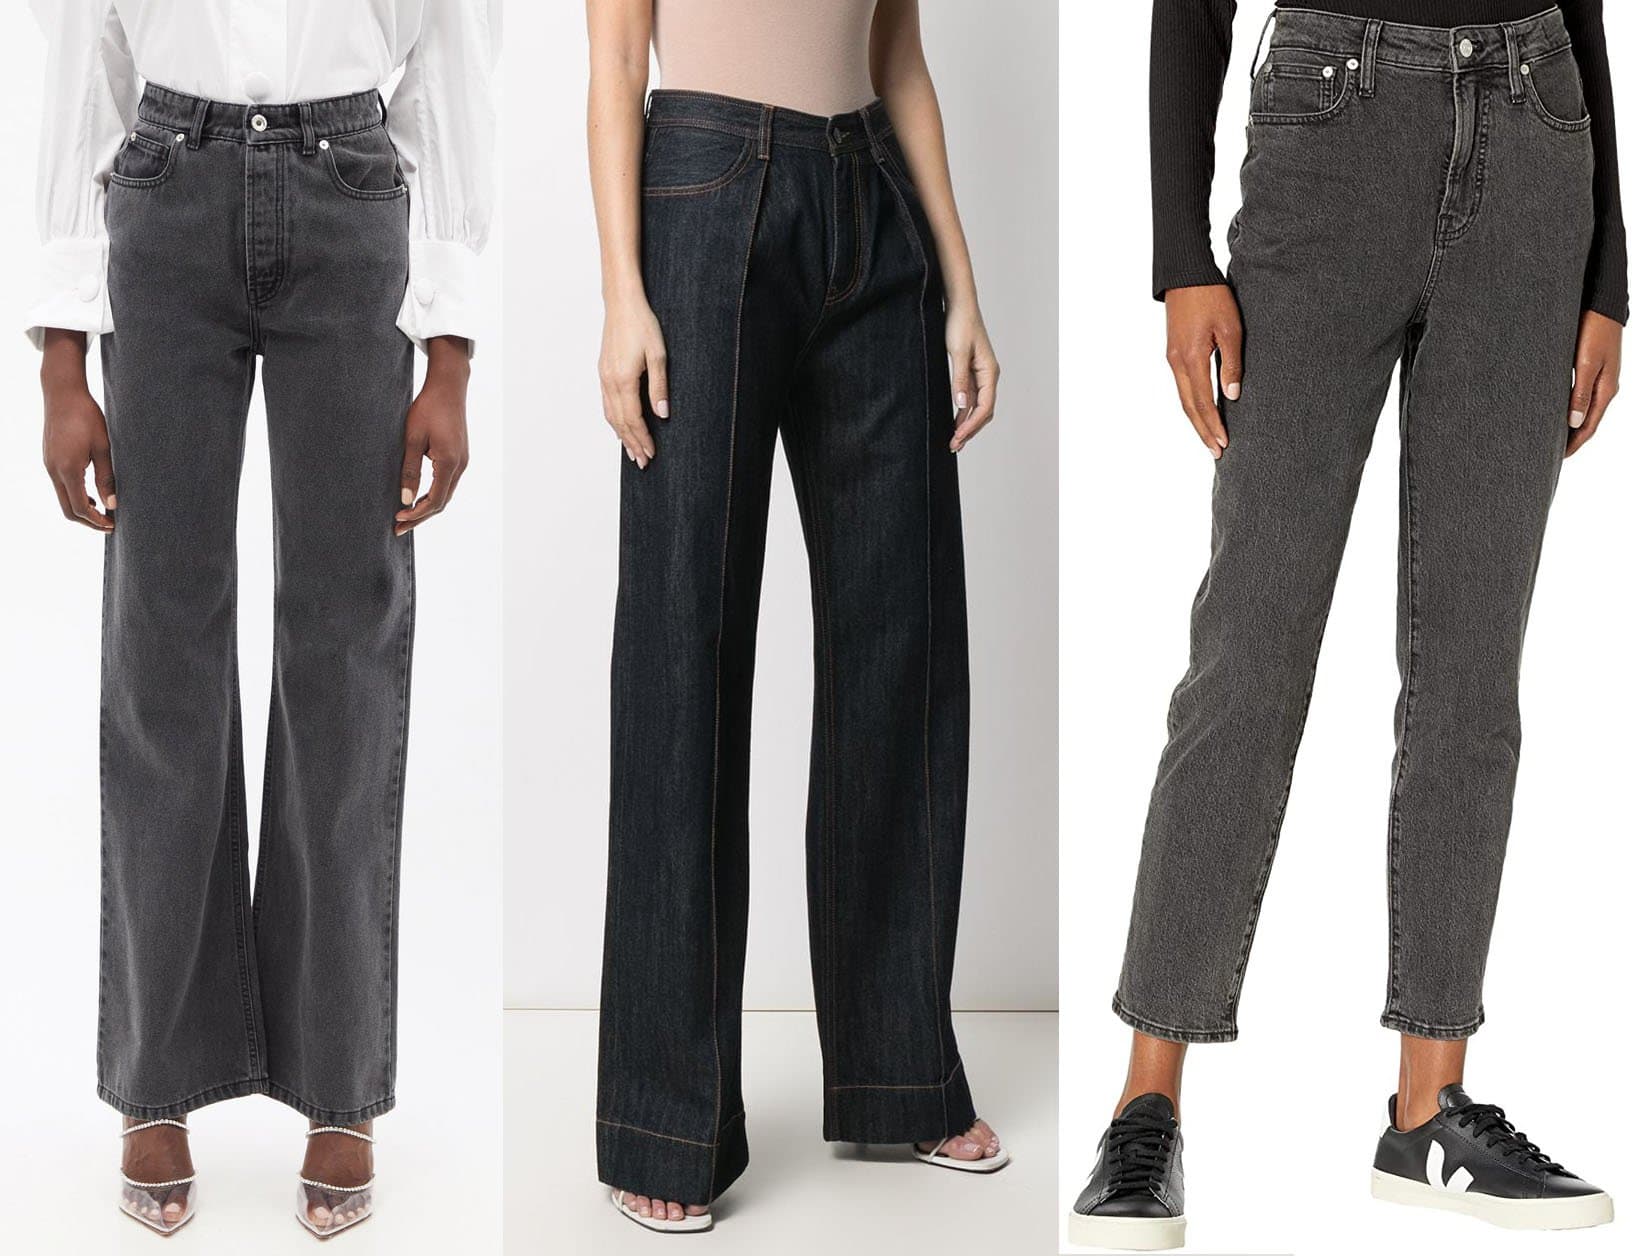 Paco Rabanne High-rise washed flared-leg jeans, Ports 1961 flared dark-wash jeans, Madewell The Curvy Perfect Vintage jeans